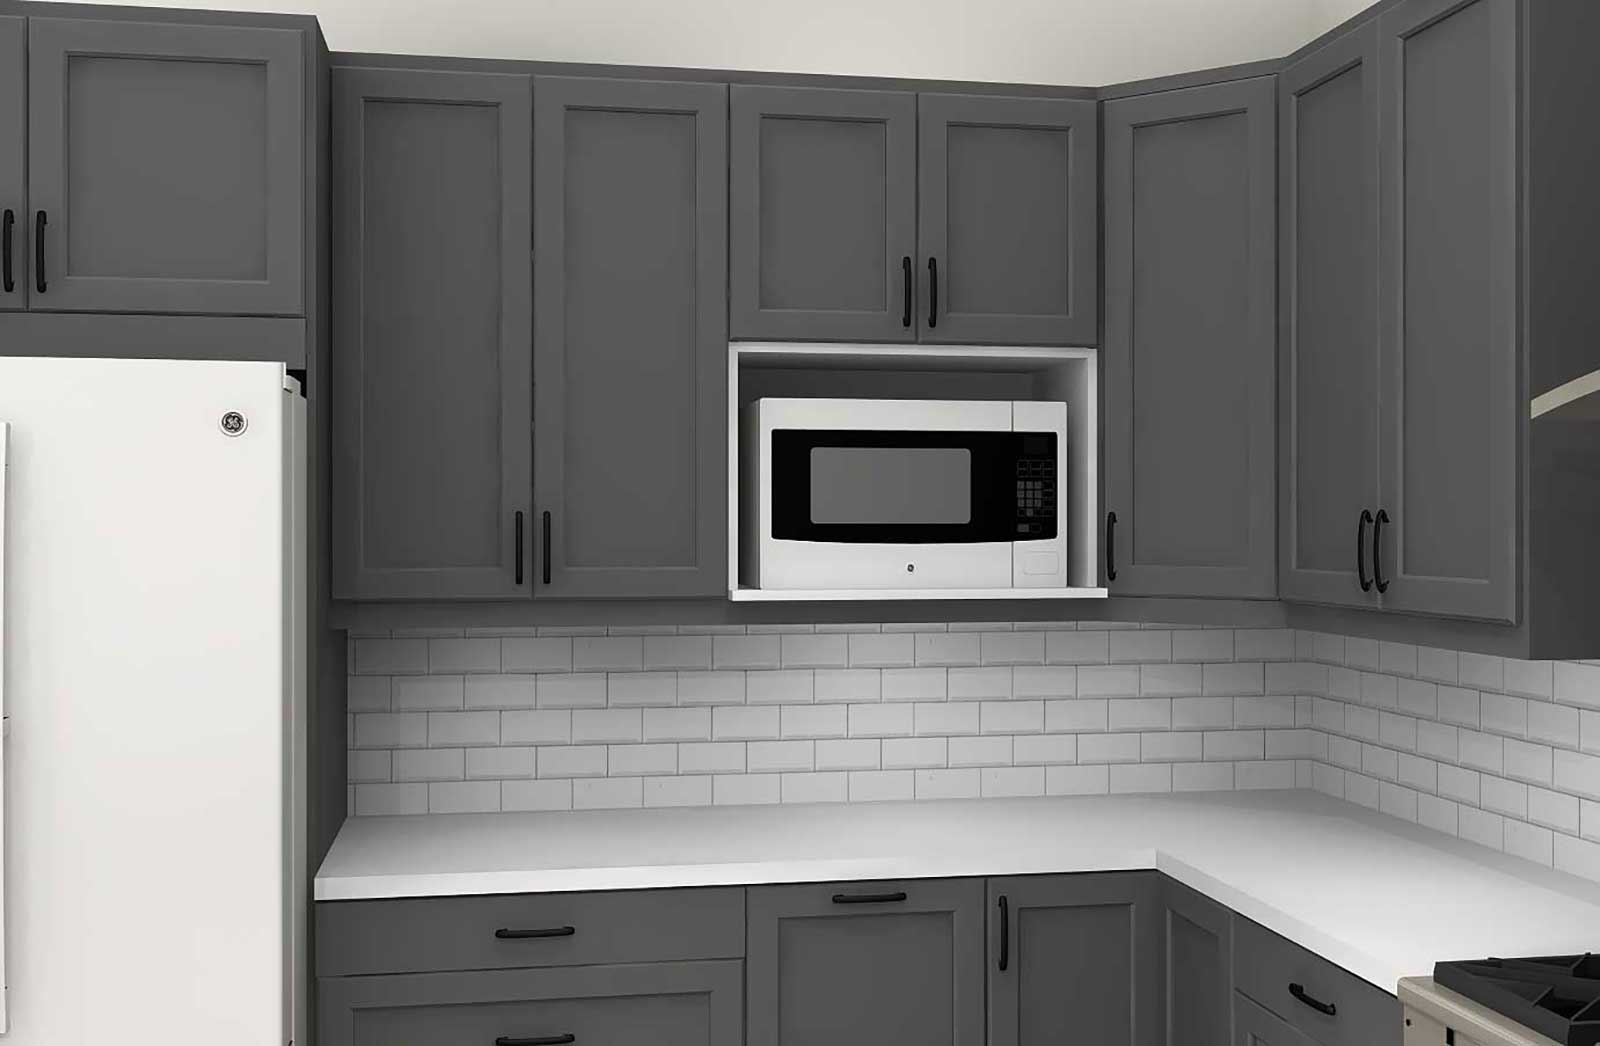 safe kitchen design tips for cabinets, counters, and circulation